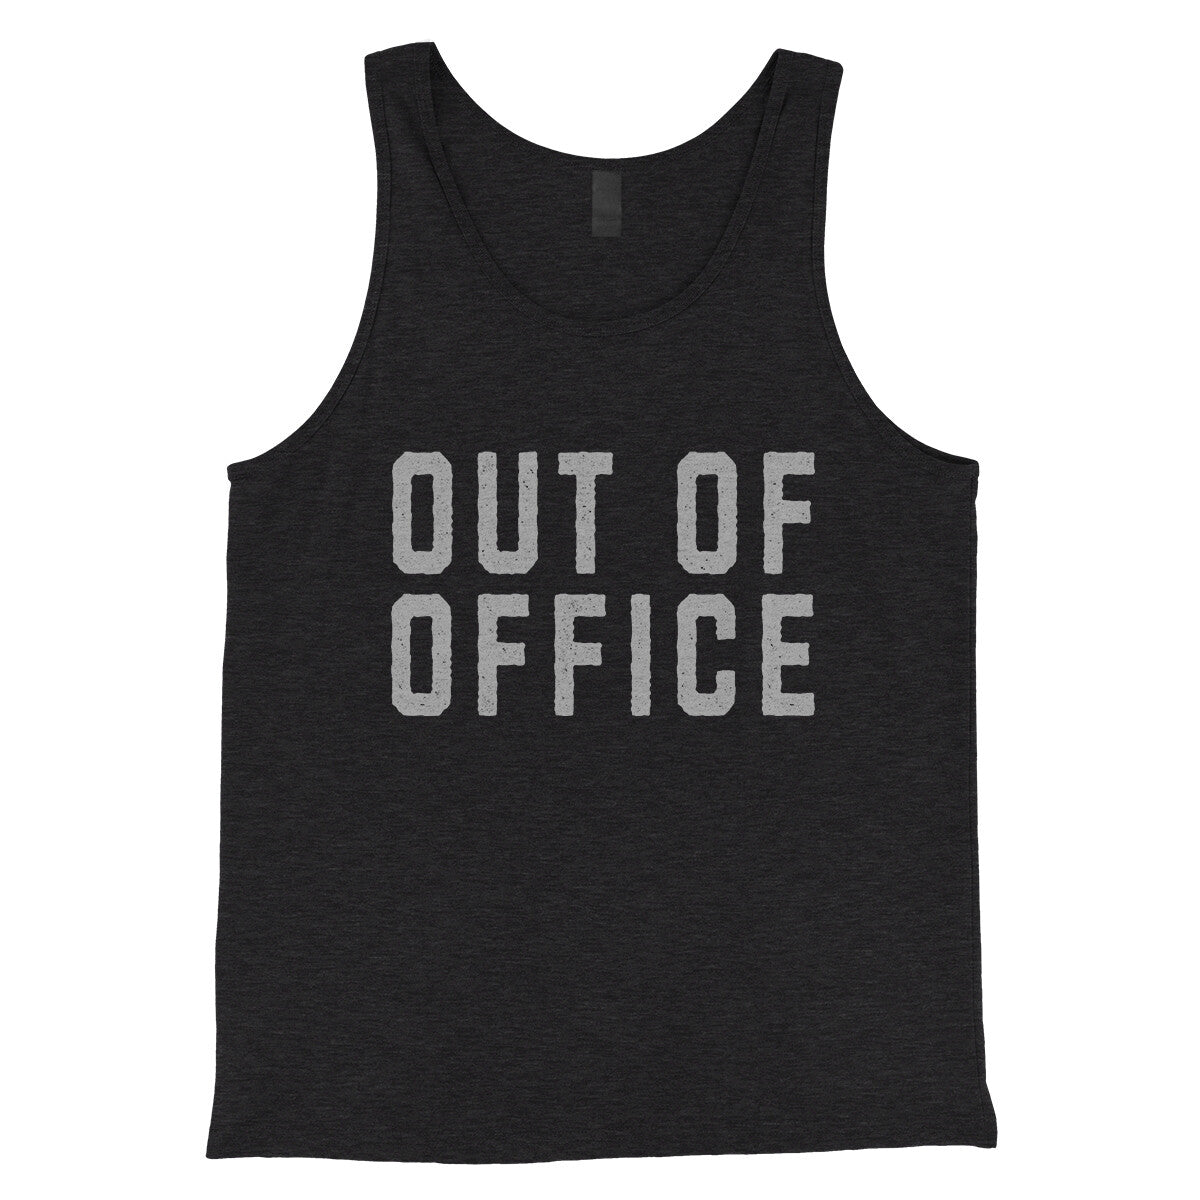 Out of Office in Charcoal Black TriBlend Color